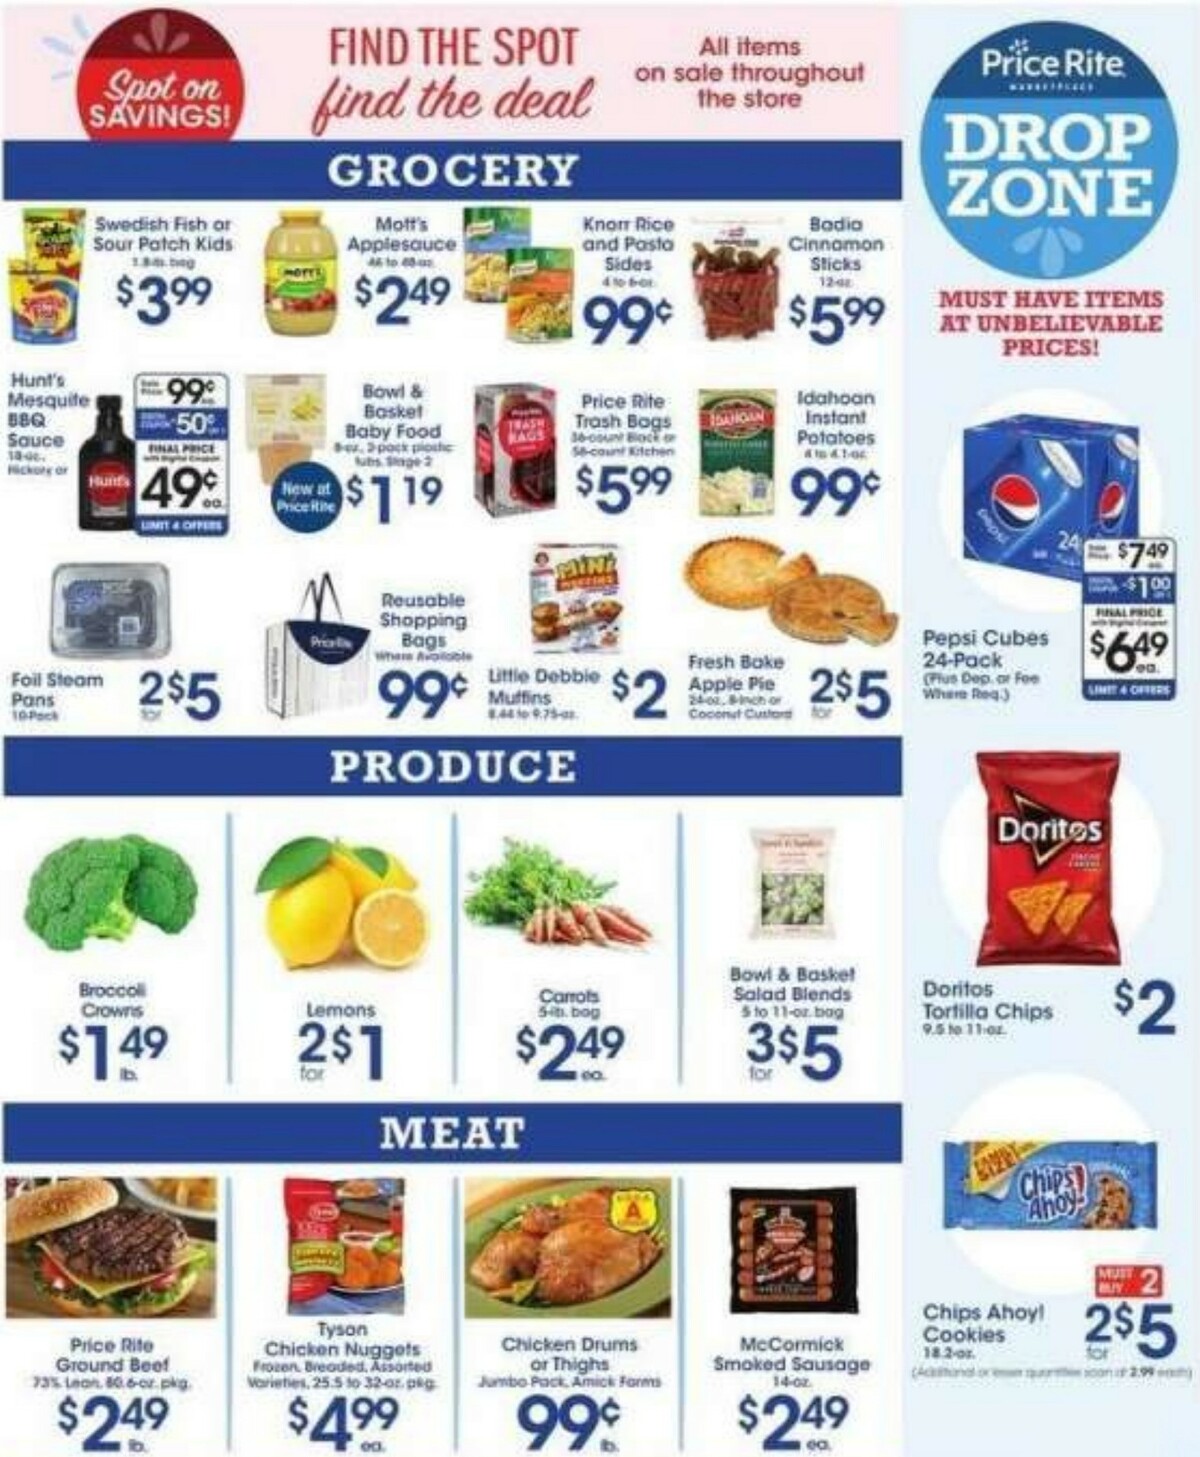 Price Rite Weekly Ad from April 2